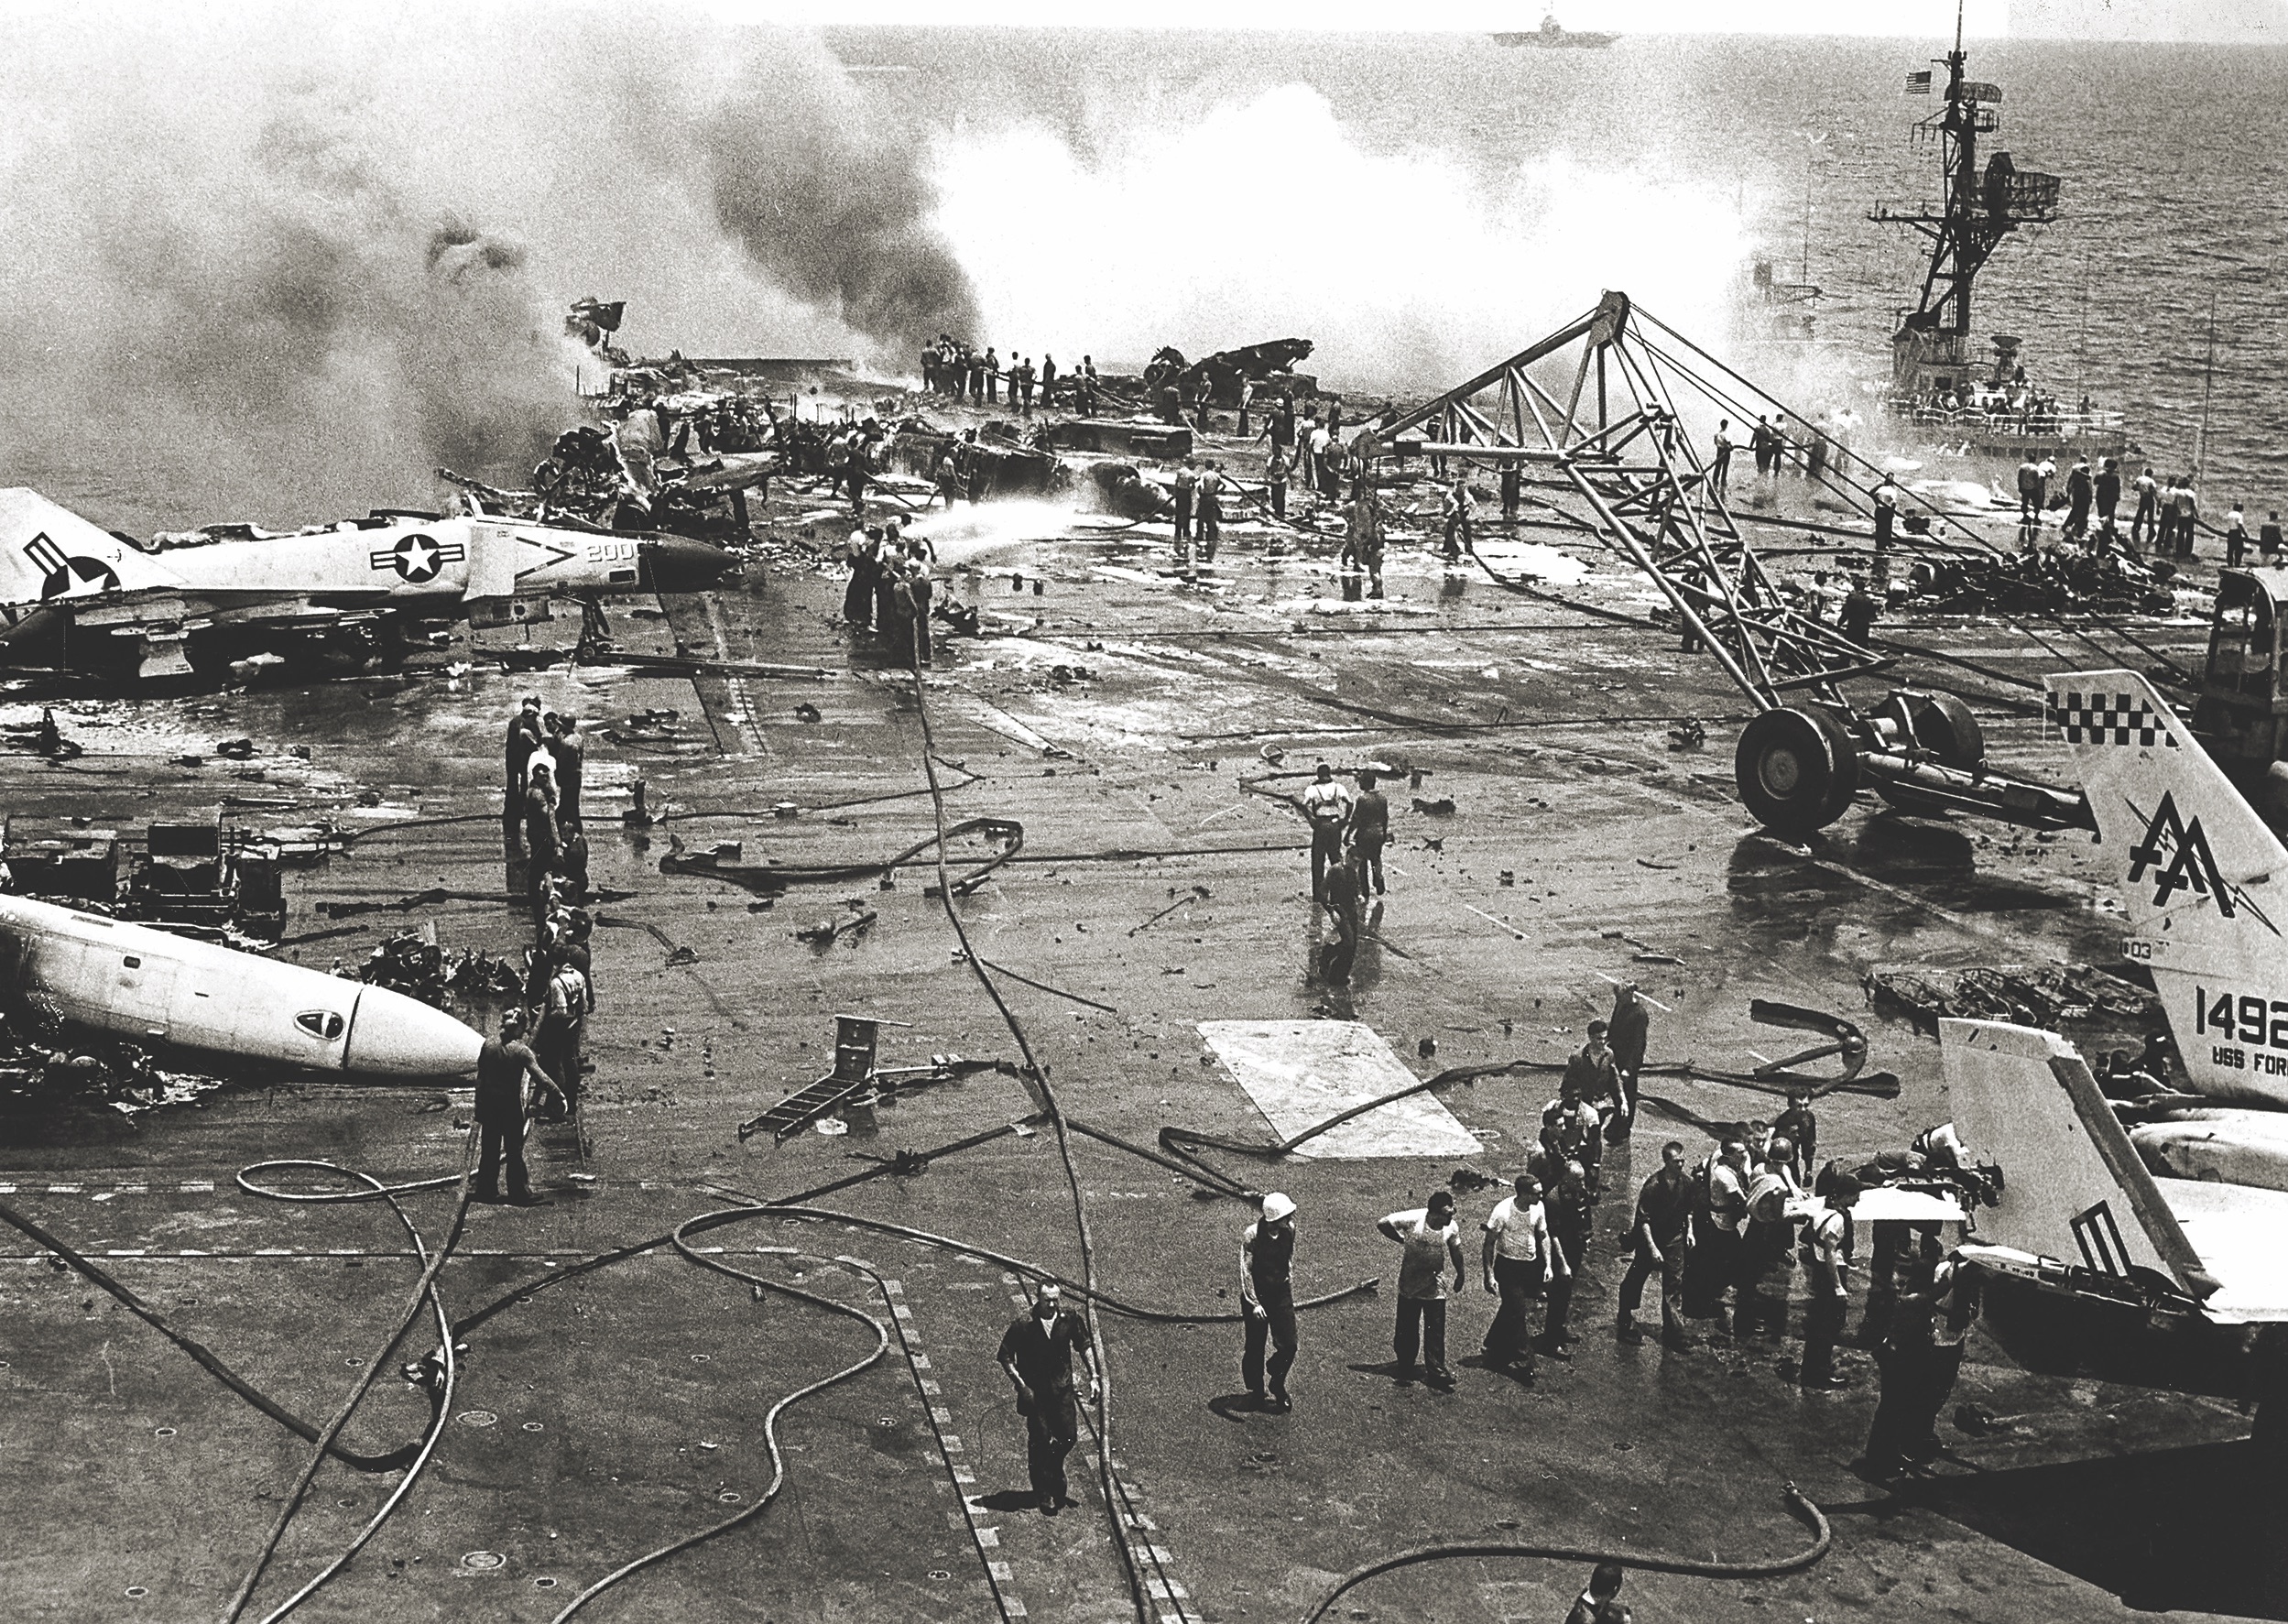 Devastation and debris are strewn across the deck of the Forrestal in the aftermath of an accidental rocket explosion on the bridge in July 1967. / U.S. Navy